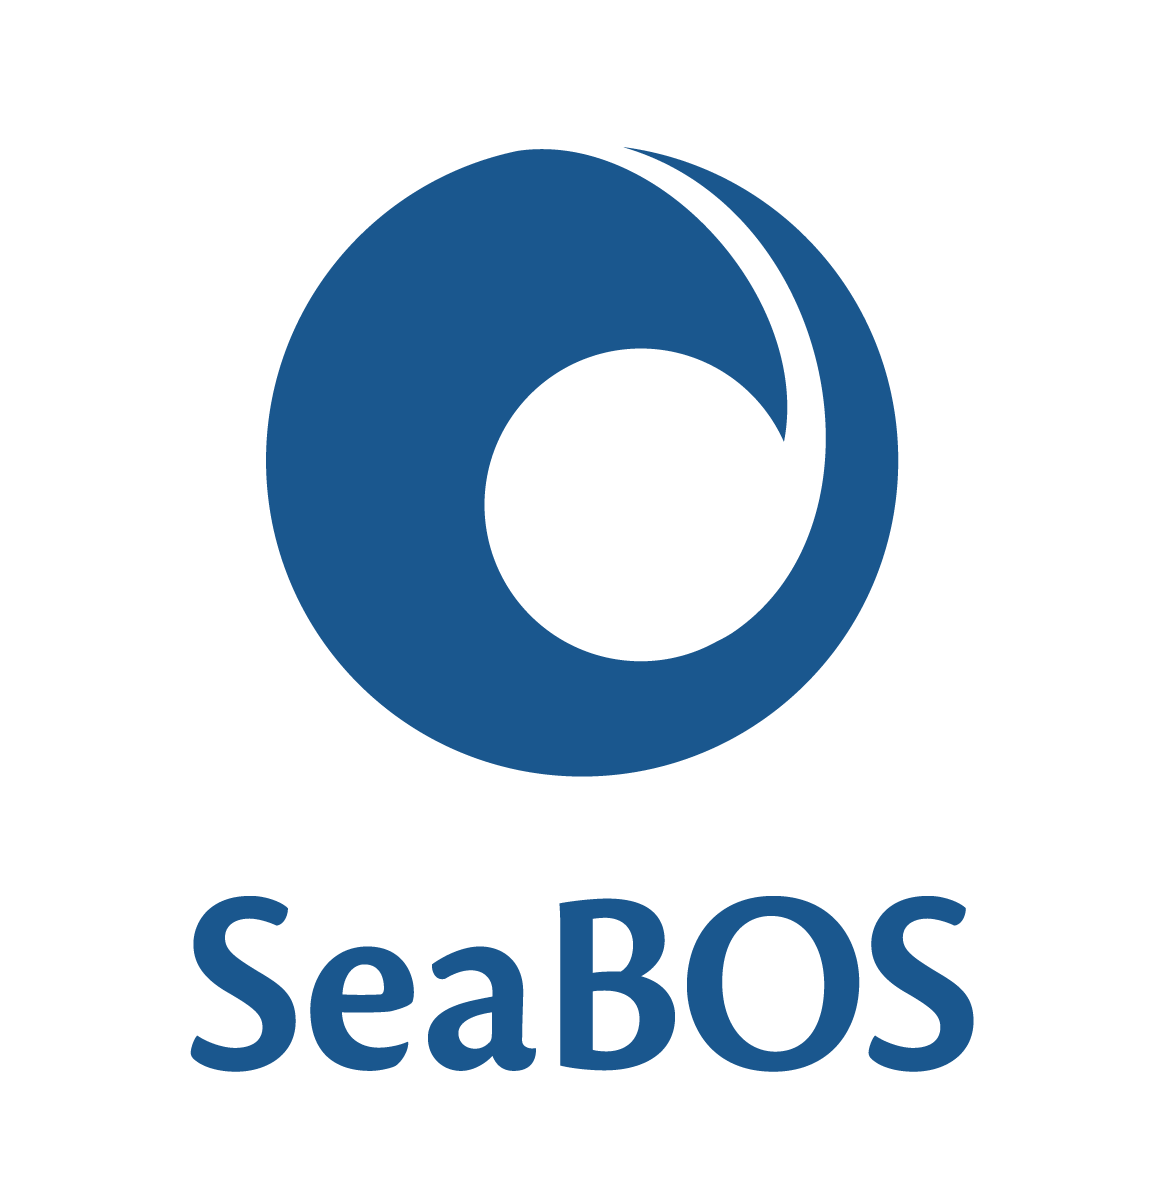 The logo of SeaBOS